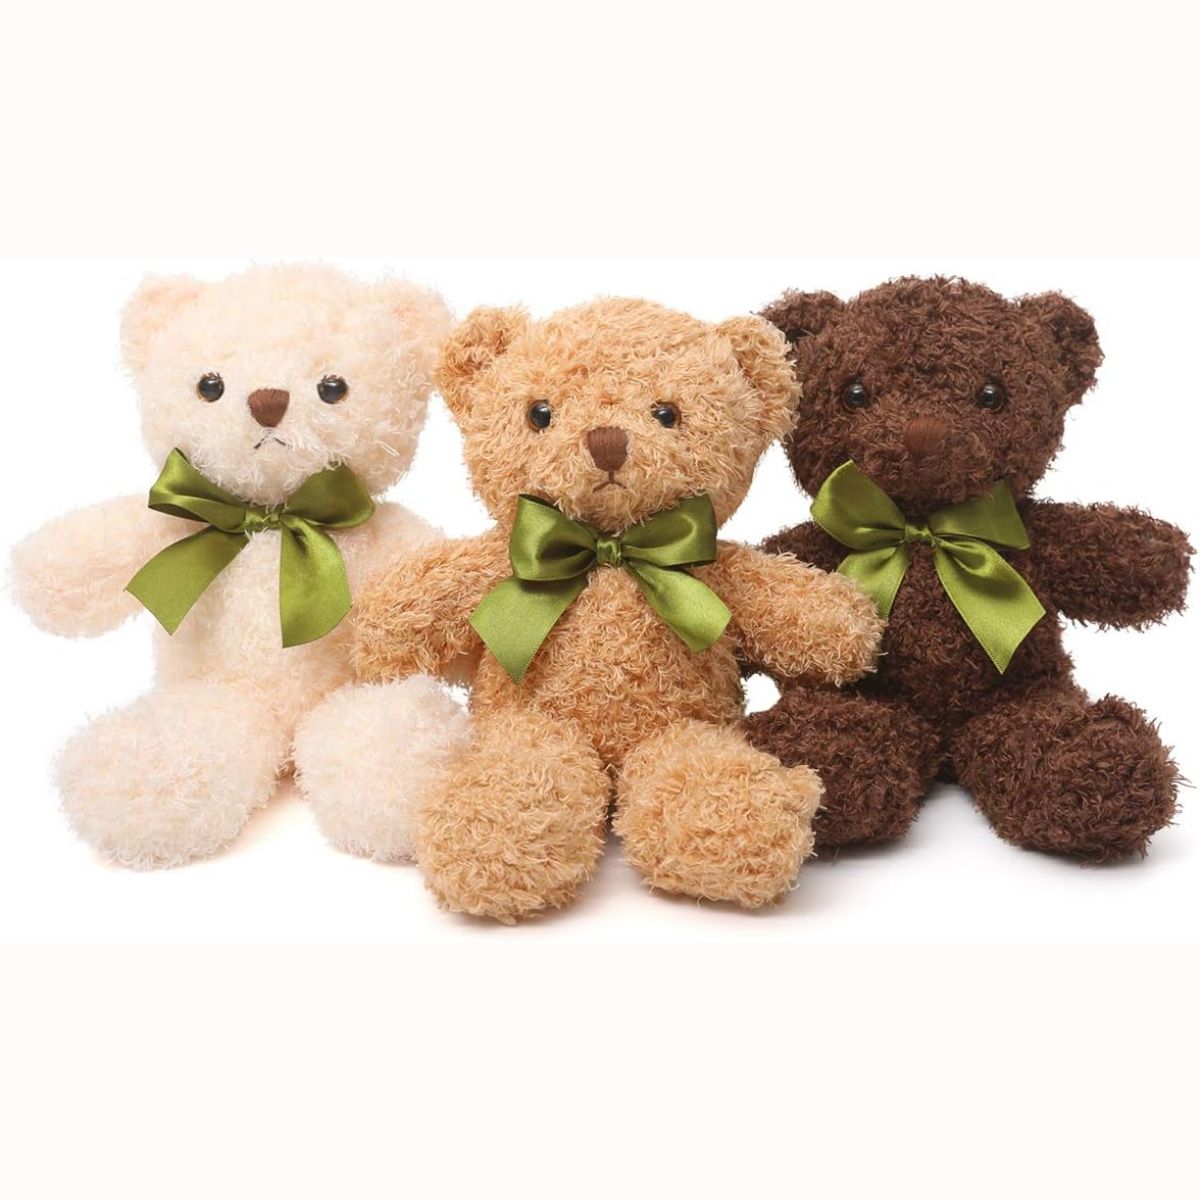 Have a look at this super adorable 3 pack of teddy bear plush toys. They come in a variety of mixed colors that you can choose from. These adorable bears are not just for gifting, they make fantastic decorations for parties and baby showers too!